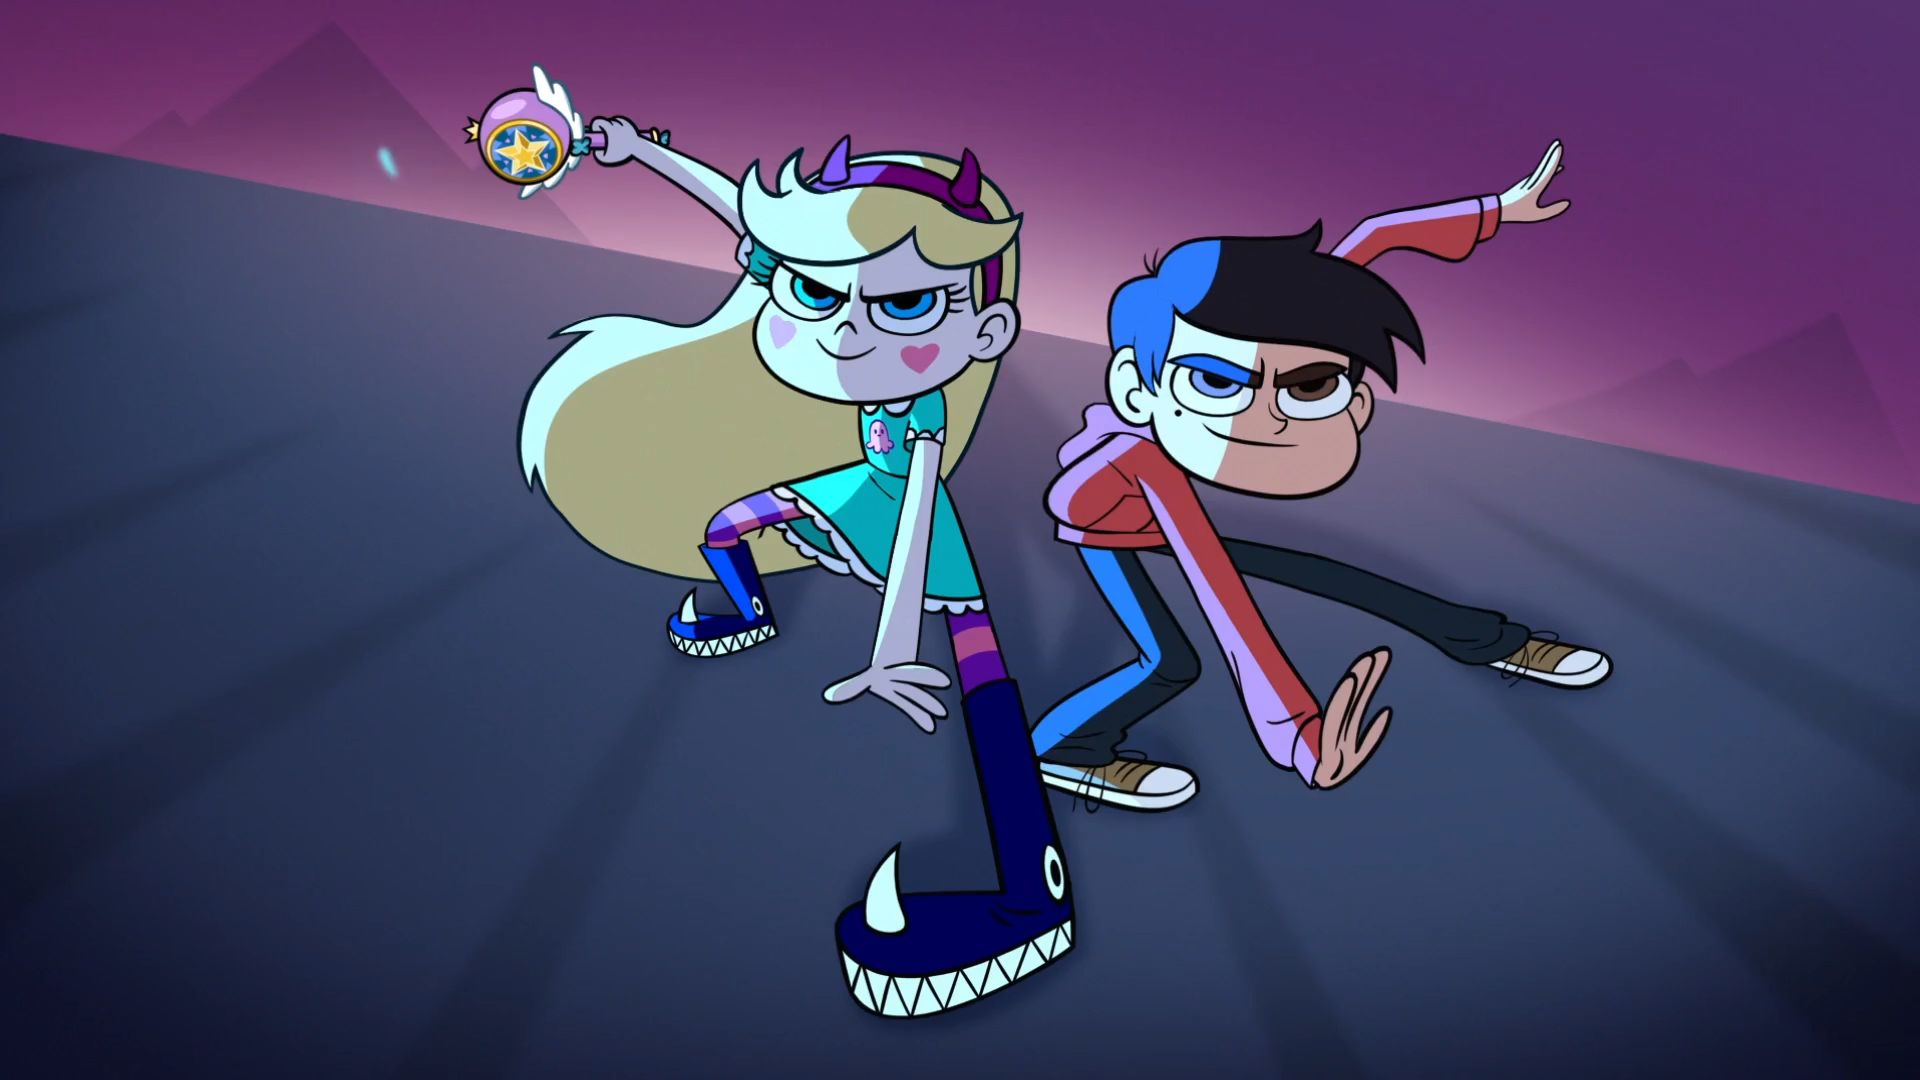 star butterfly, star vs the forces of evil, tv show, marco diaz